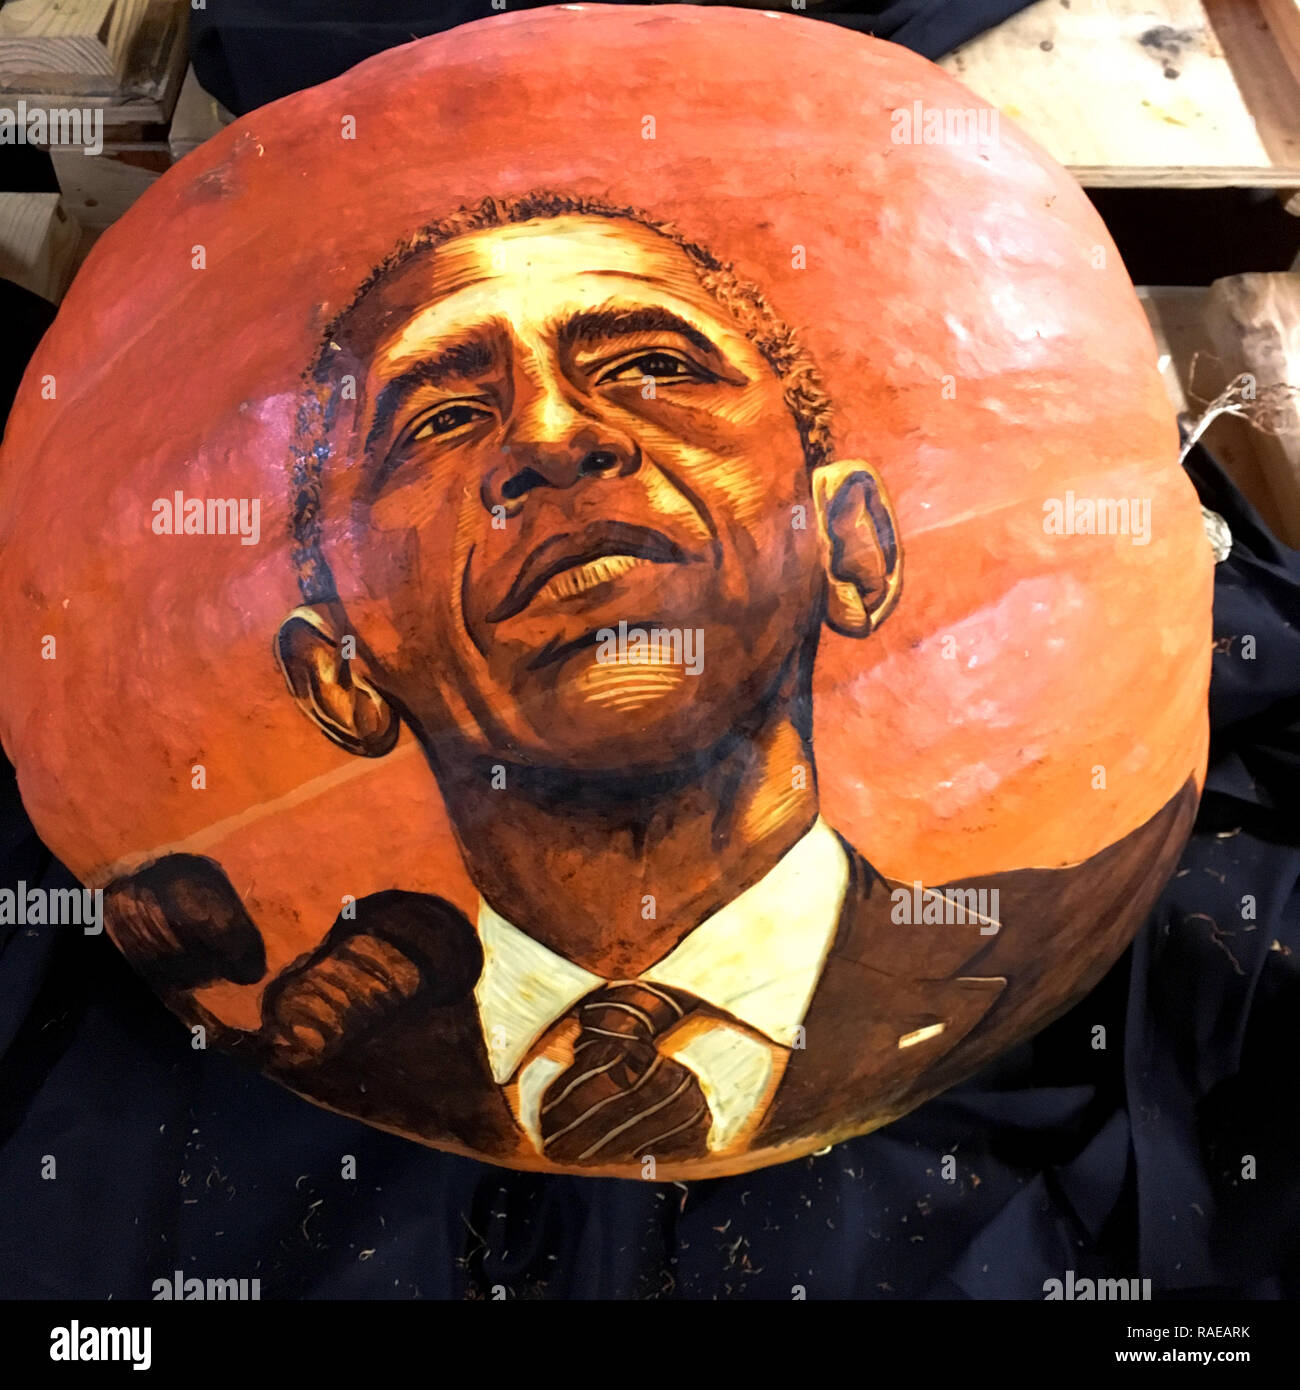 NEW YORK, USA: Barrack Obama. THESE SPOOKTACULAR pumpkin carvings featuring intricate designs that took up to SIXTEEN-HOURS to perfect are sure to get Stock Photo